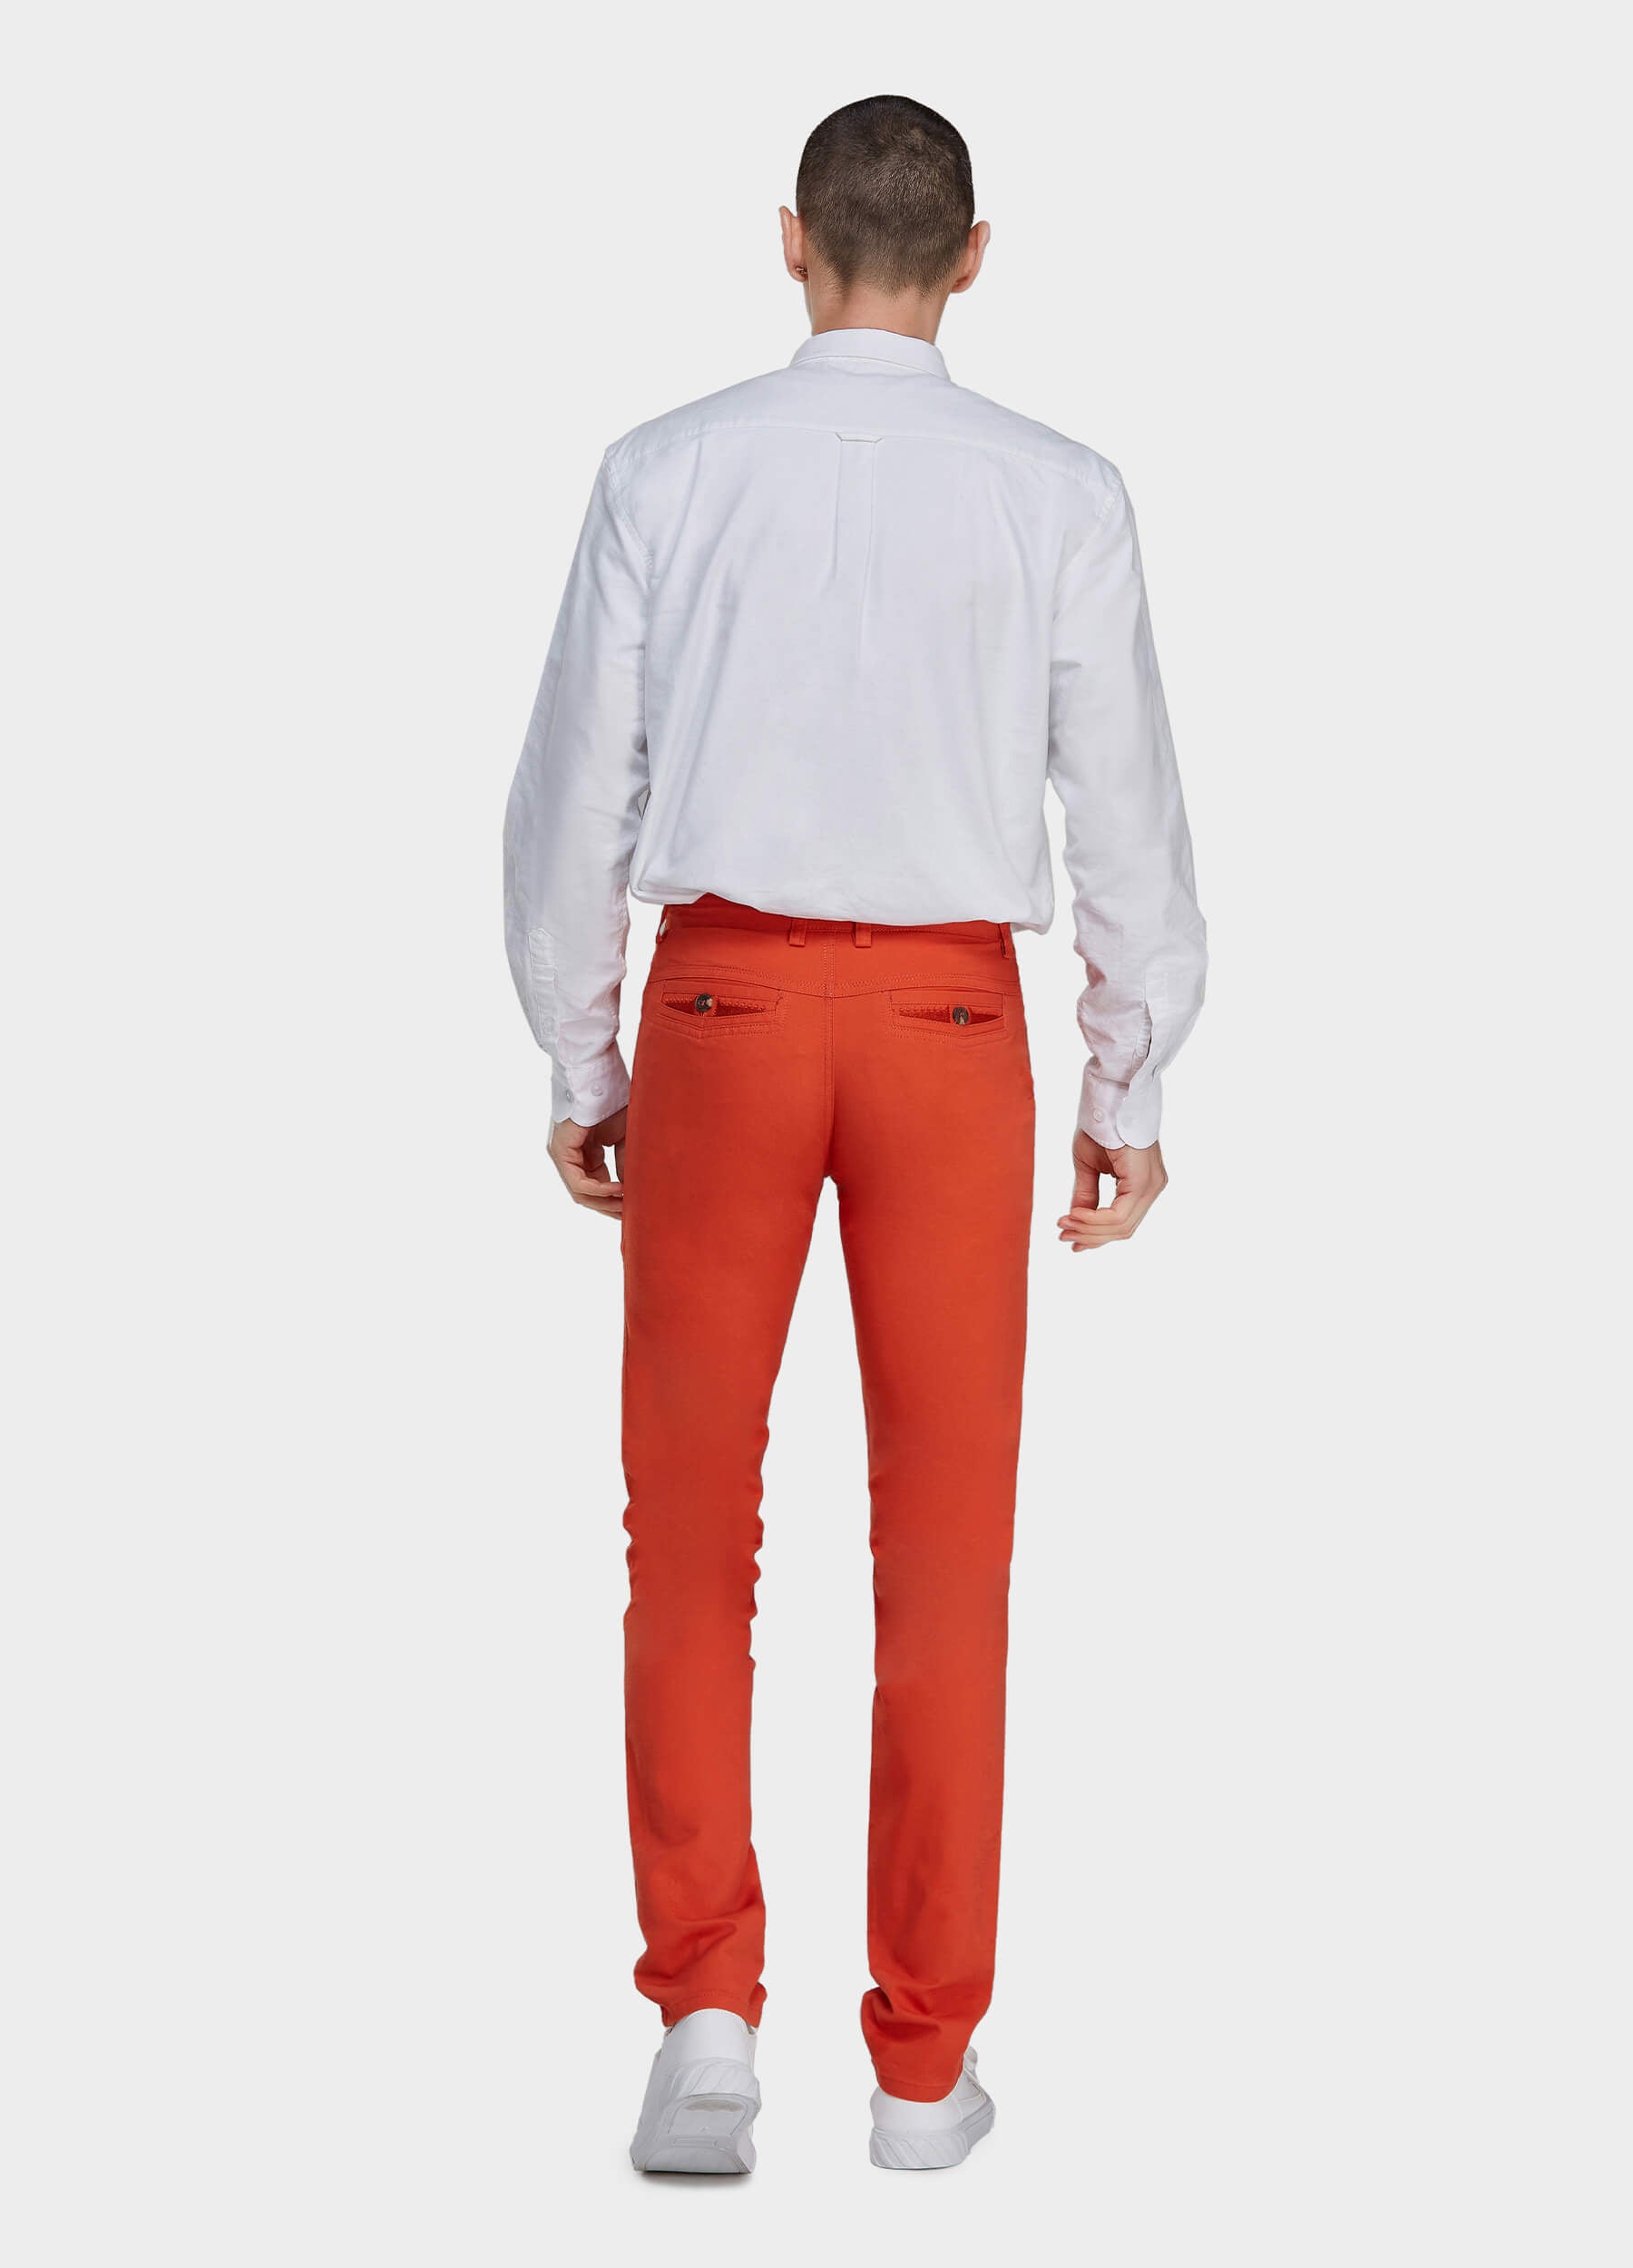 Men's Fall Straight Leg Zip Fly Button Closure Slant Pocket Casual Trousers-Orange back view